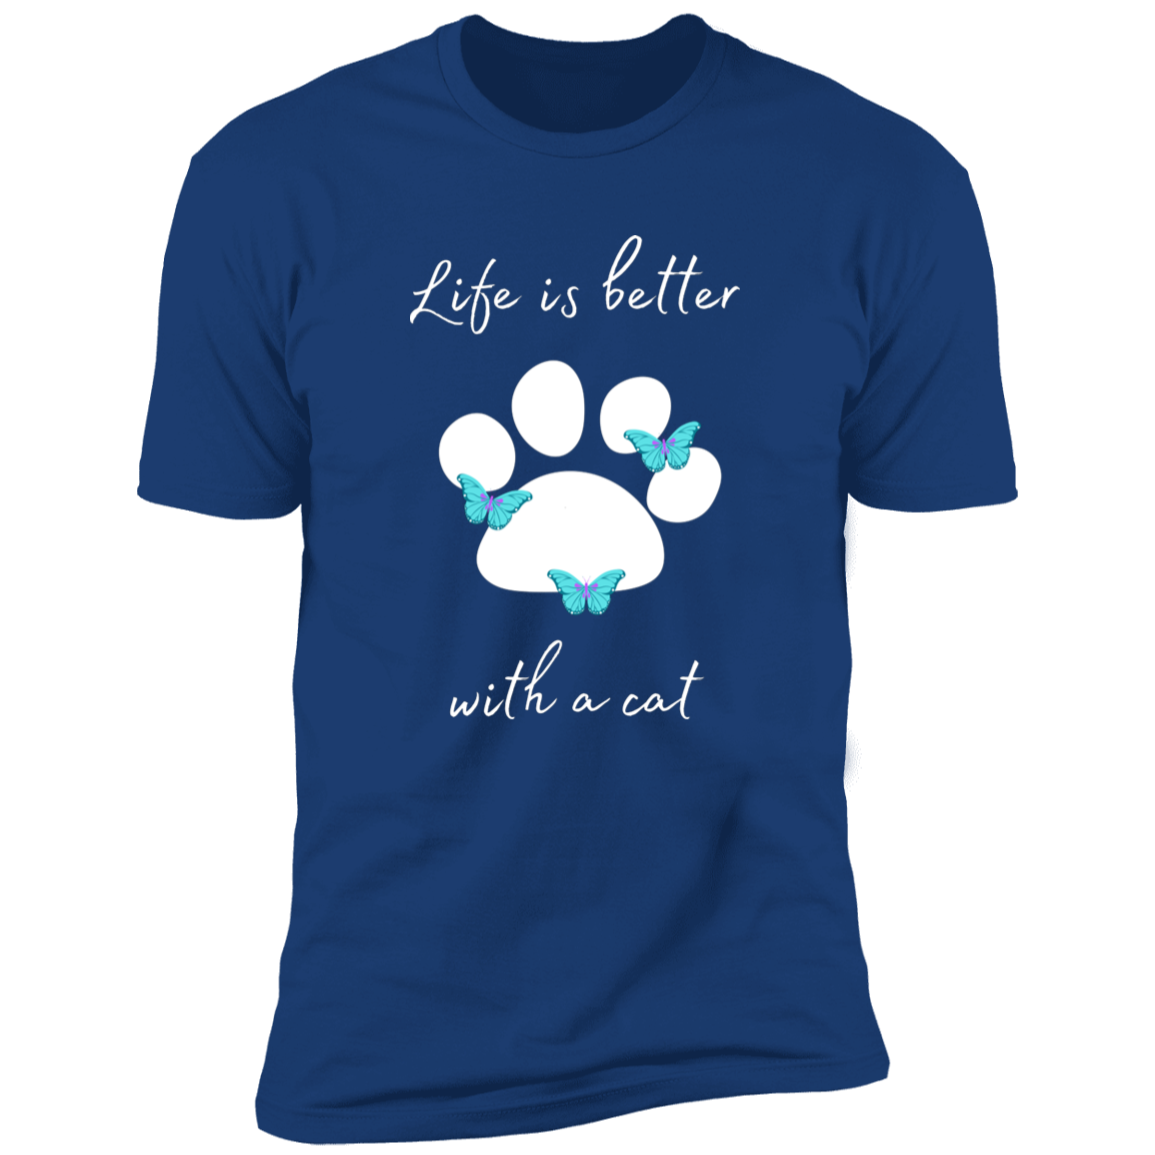 Life is Better with a Cat T-shirt, cat shirt for humans, Cat T-shirt in royal blue